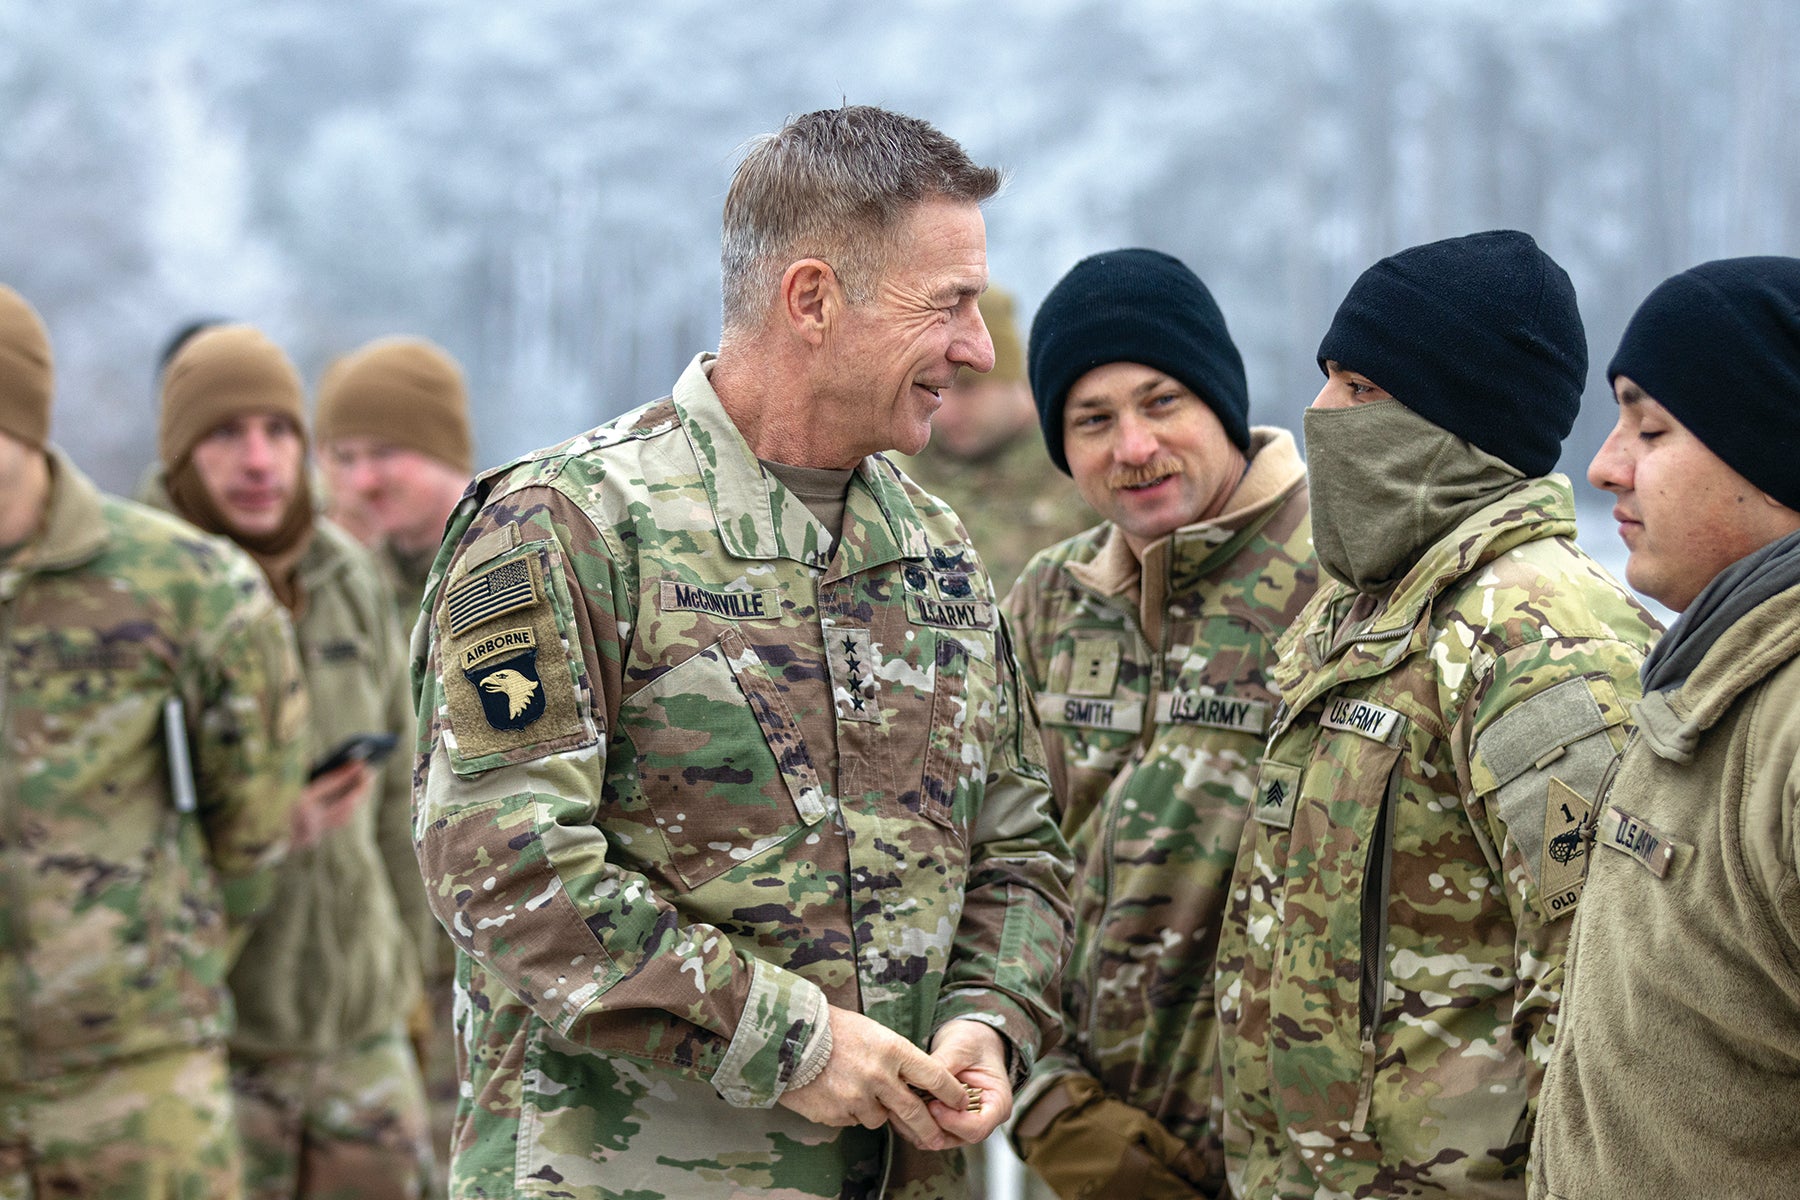 Army Chief of Staff Gen. James McConville, left, presents a challenge coin to a soldier with the 1st Armored Division Combat Aviation Brigade during a visit to Powidz, Poland, in December. (Credit: U.S. Army/Spc. William Thompson)